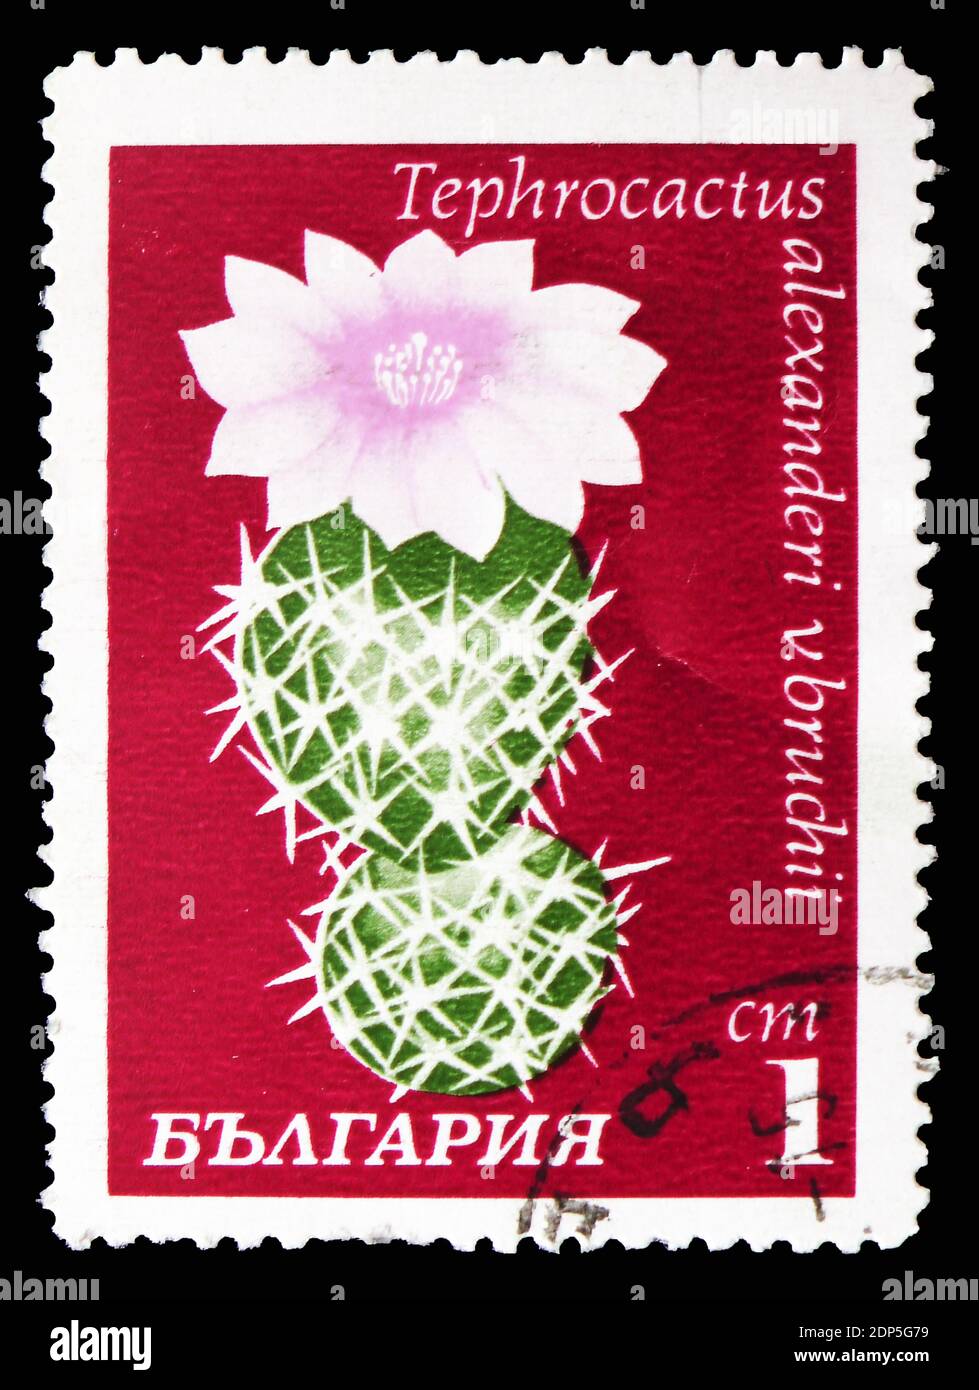 MOSCOW, RUSSIA - SEPTEMBER 15, 2018: A stamp printed in Bulgaria shows Tephrocactus alexanderi, Cactuses serie, circa 1970 Stock Photo